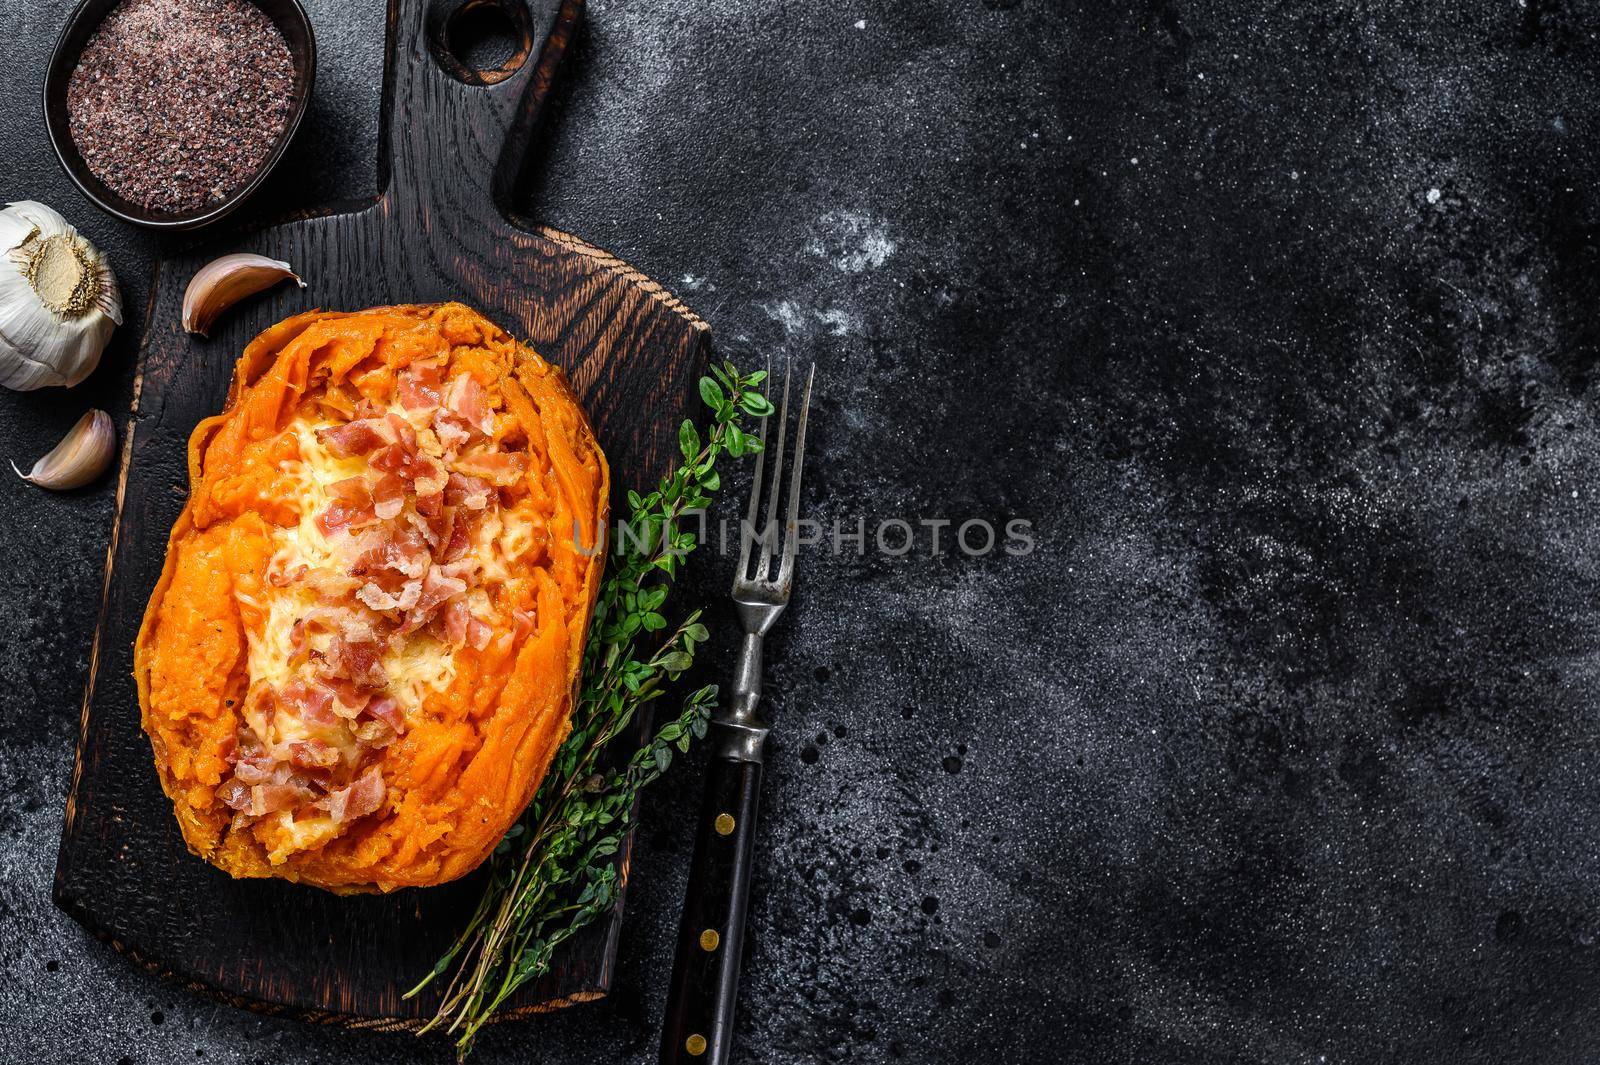 Baked sweet potato yam stuffed with ground beef and cheese. Black background. Top view. Copy space.